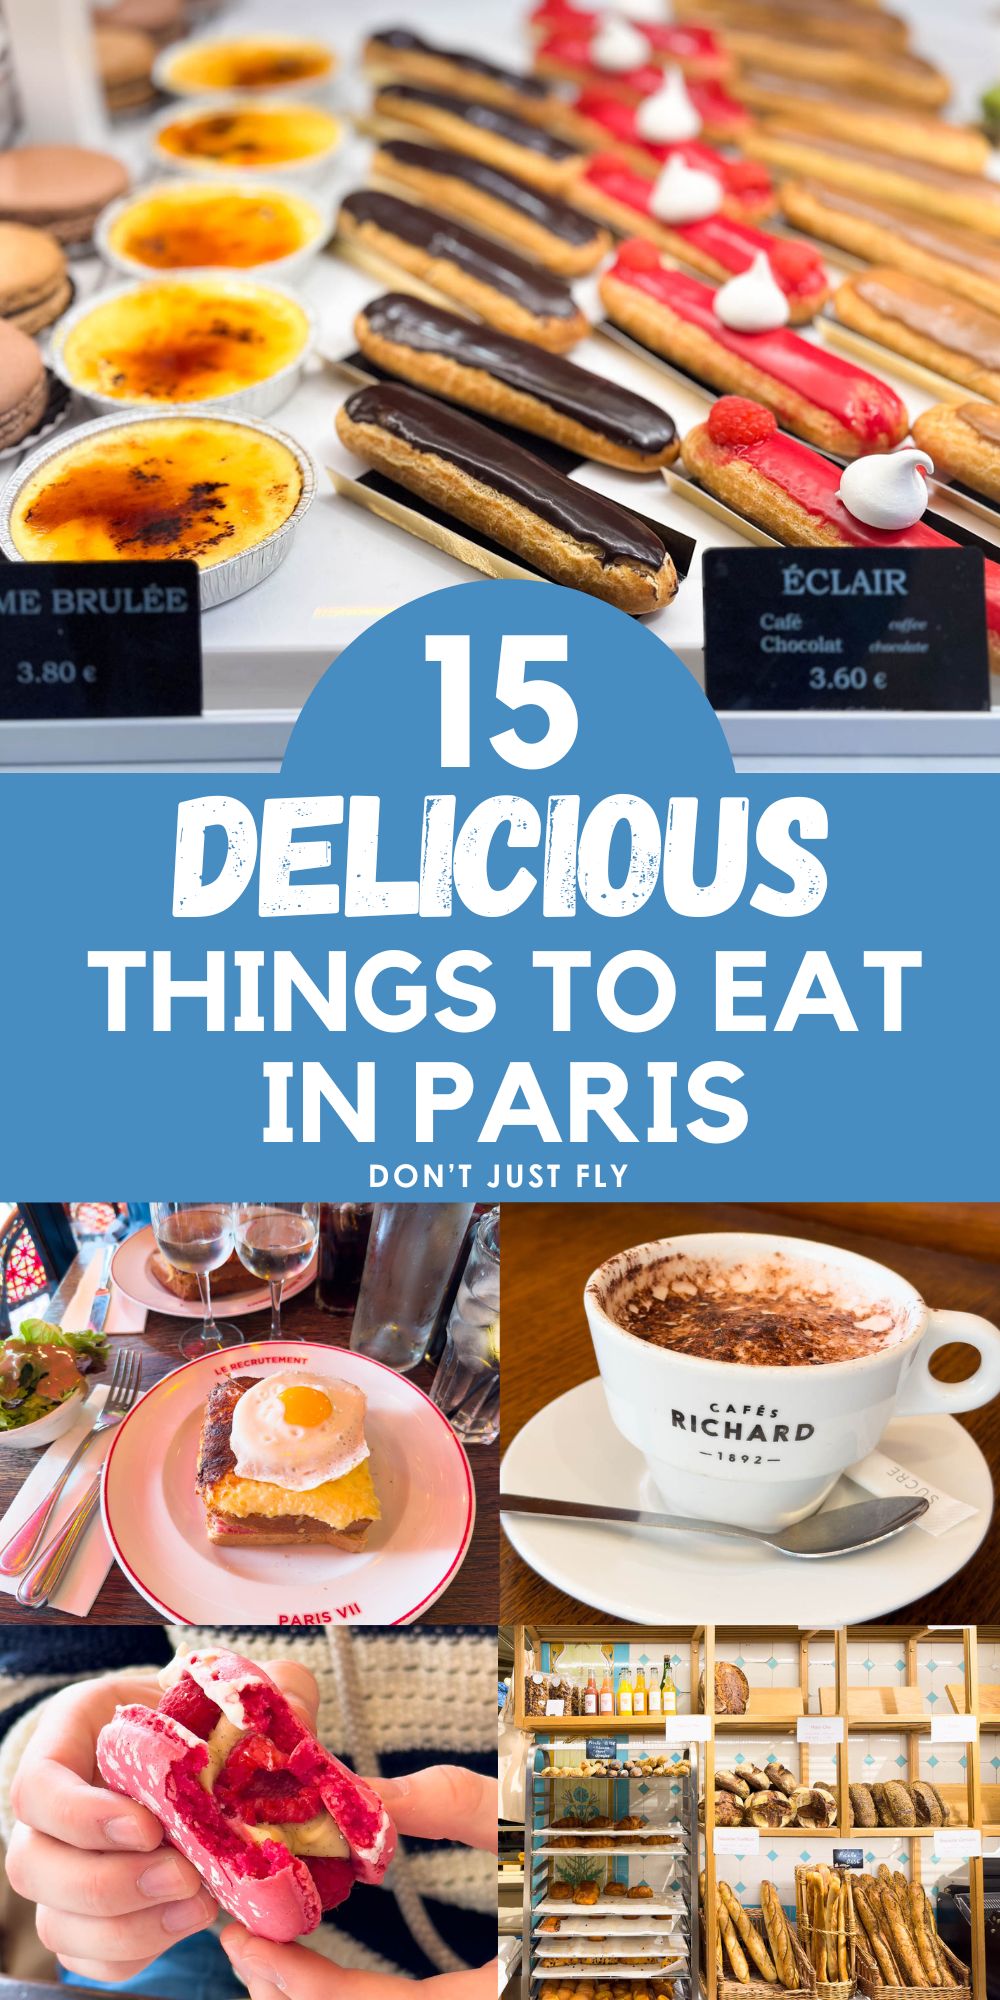 The photo collage shows photos of 5 different foods served in Paris.